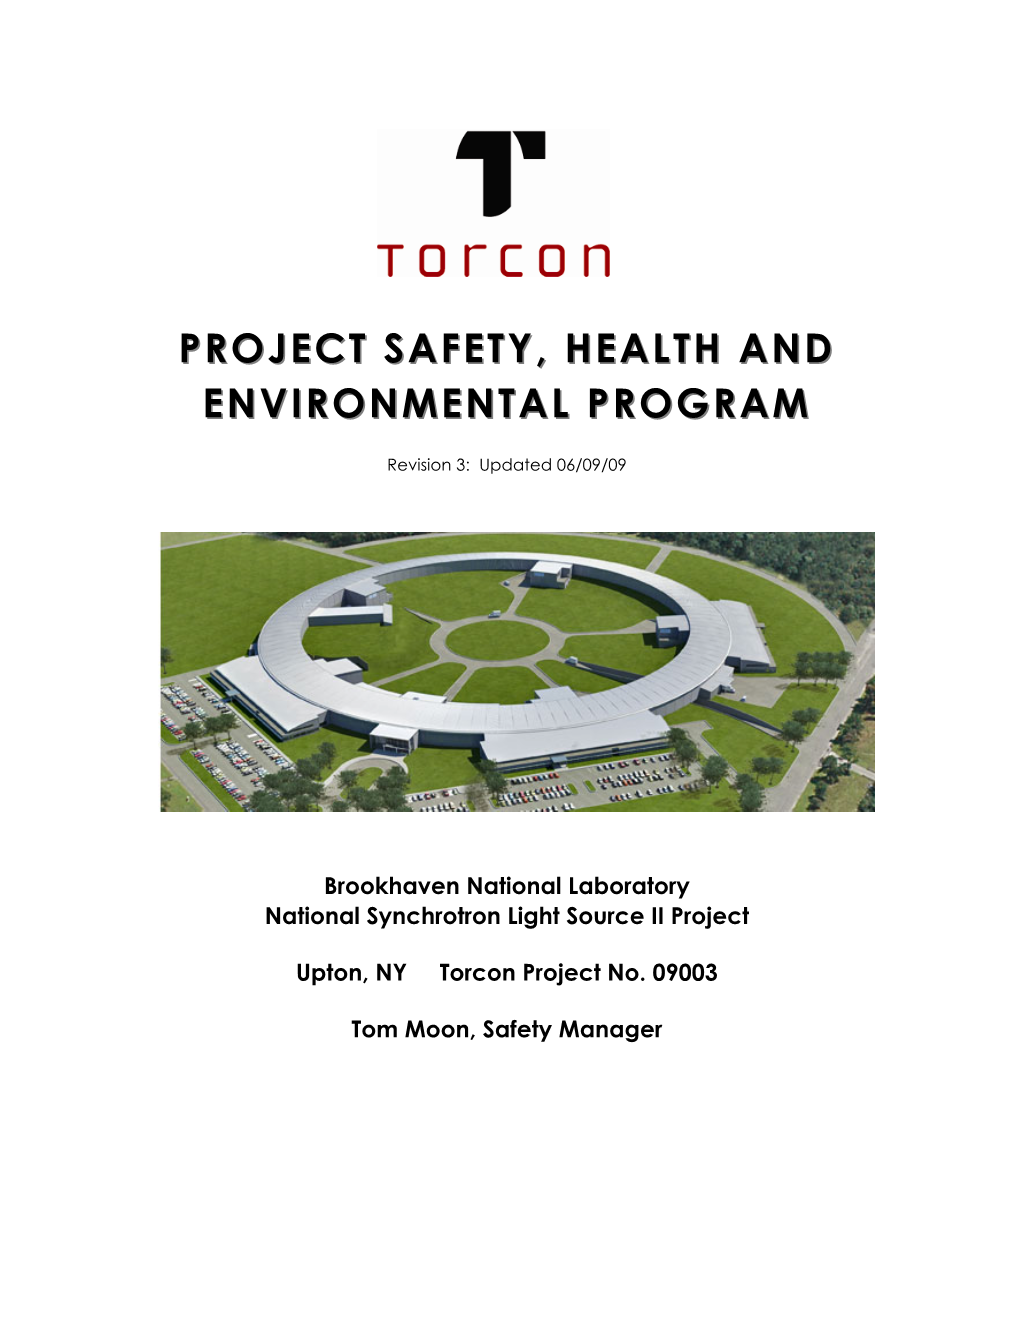 Project Safety, Health and Environmental Program